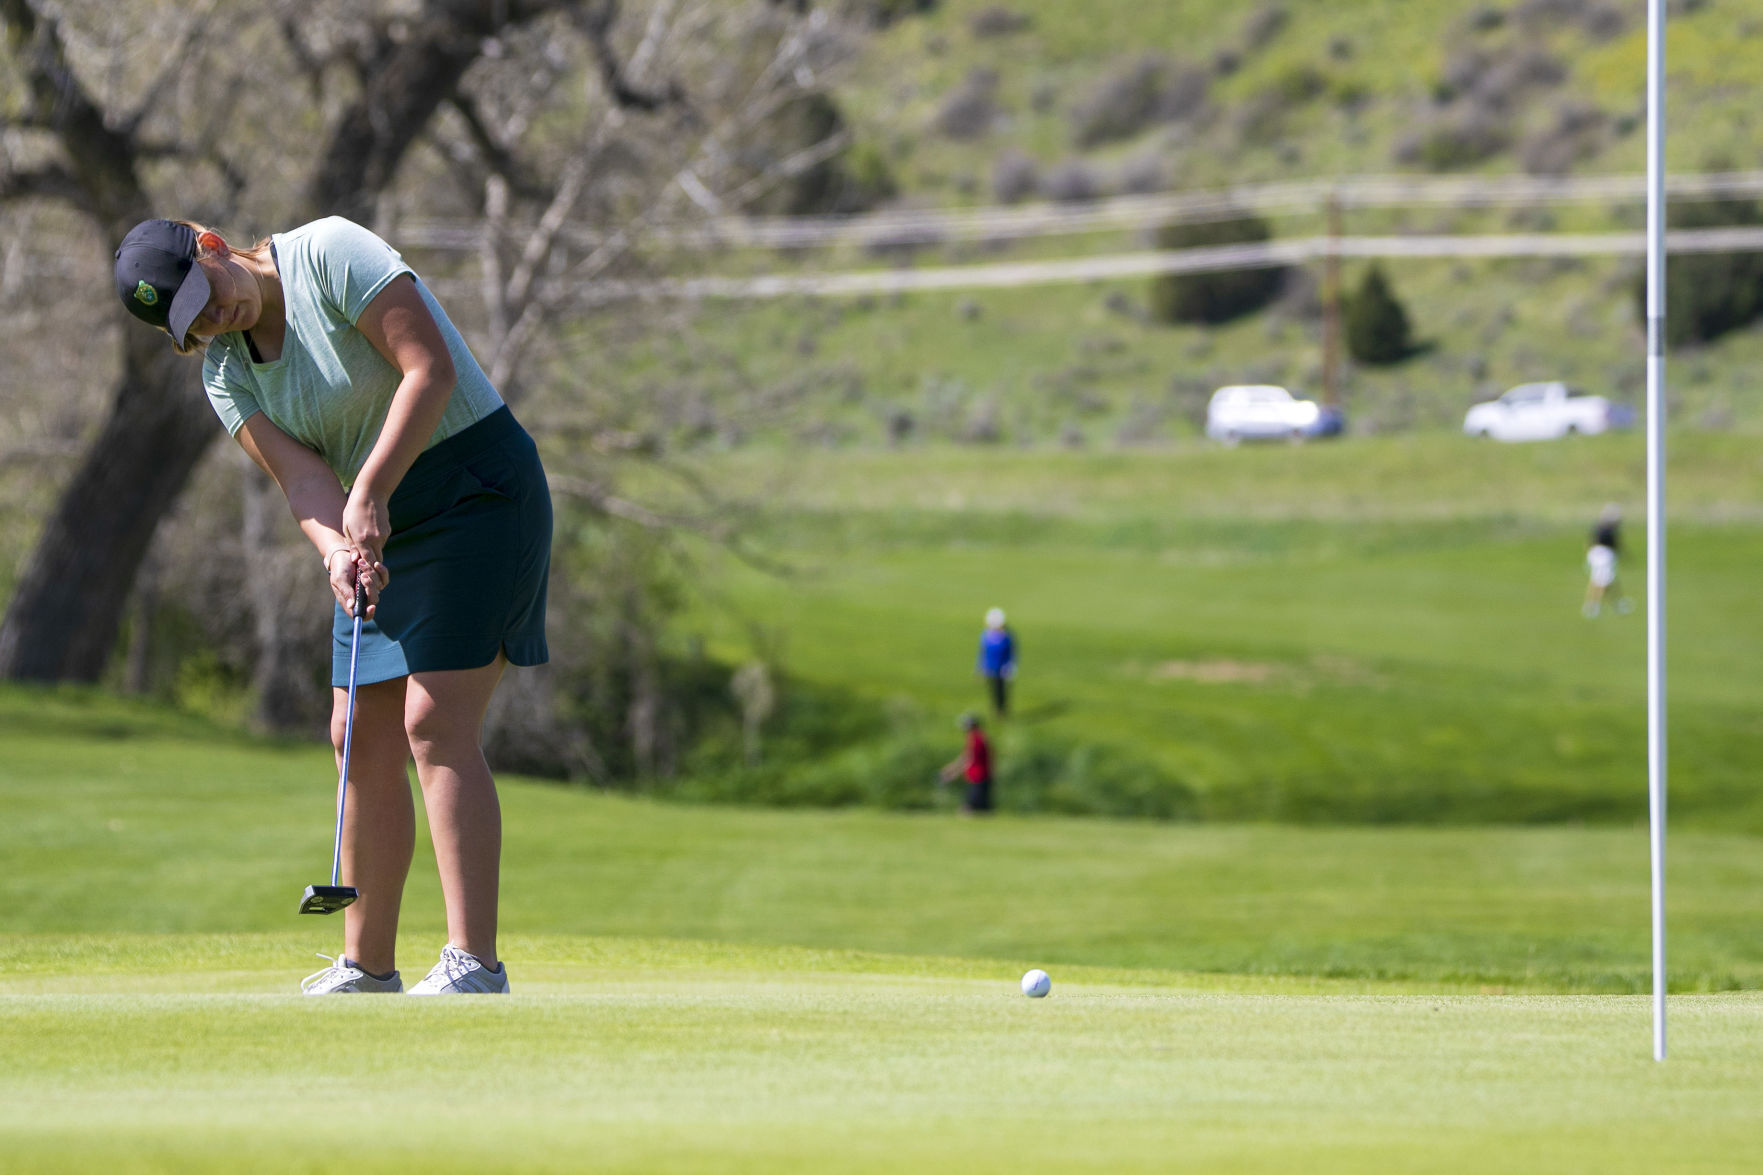 Womens State Amateur golf championship begins Thursday in Billings